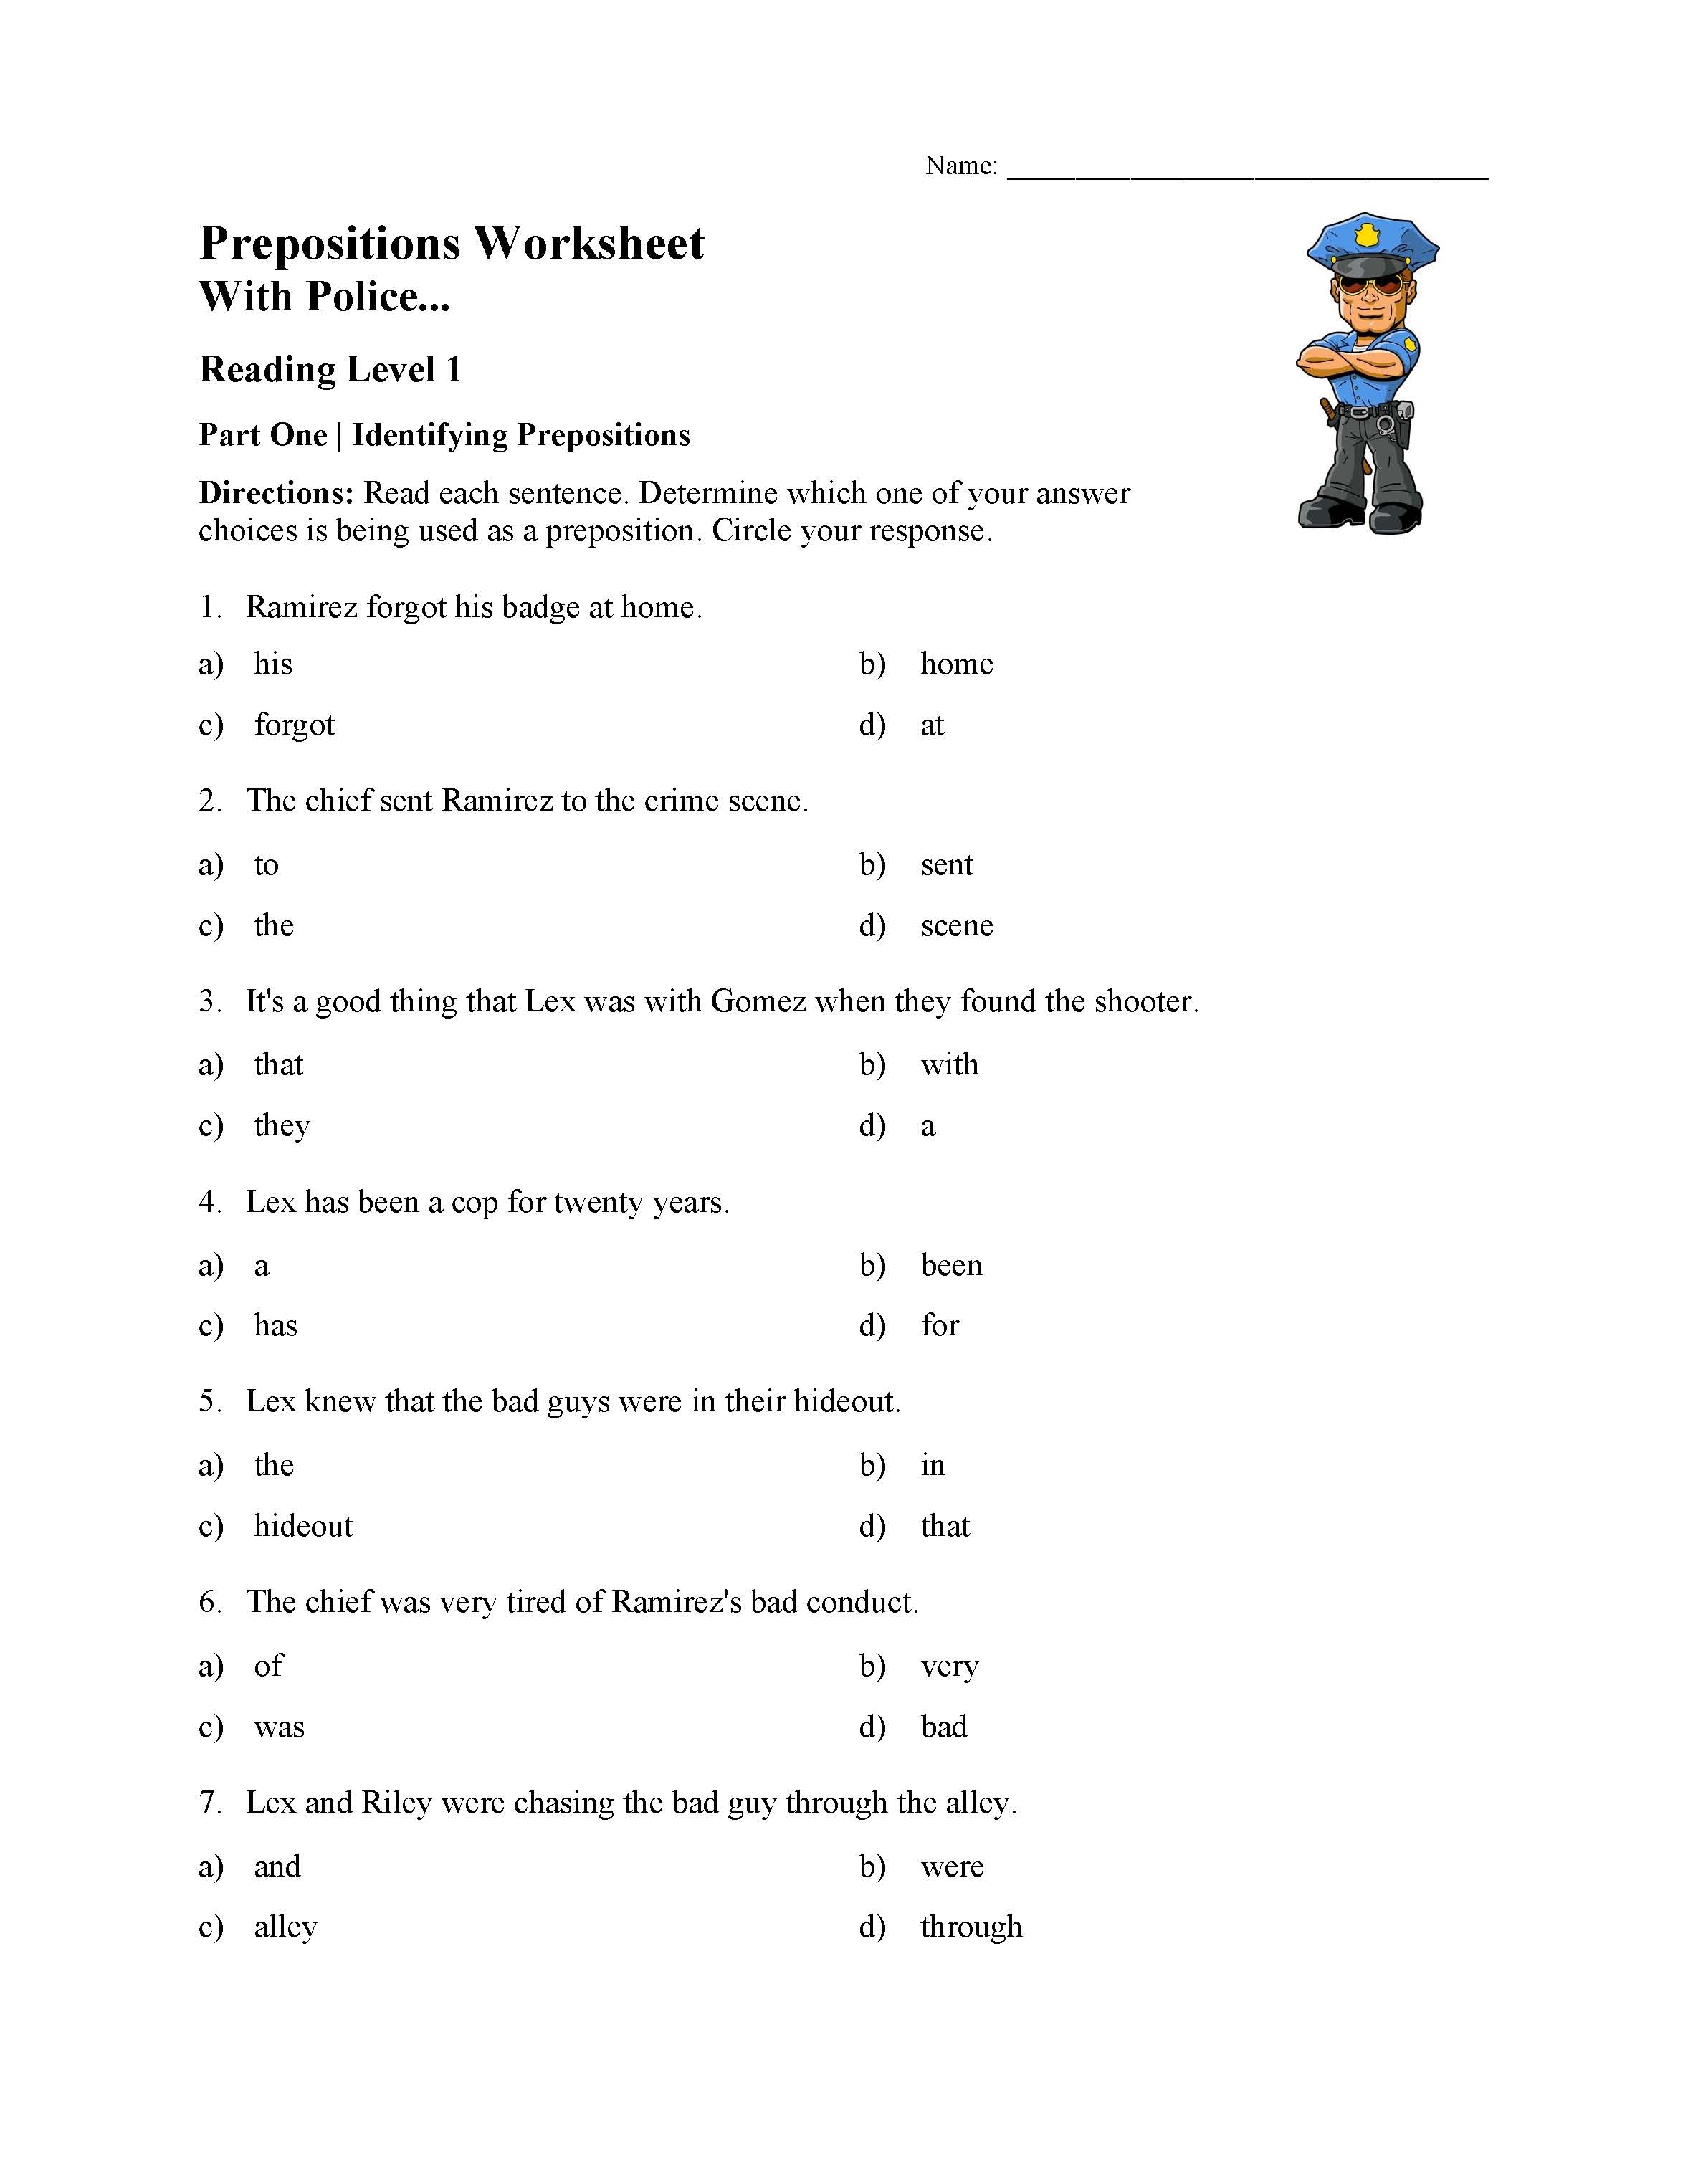 This is a preview image of the Preposition Worksheet 1 - Reading Level 1.